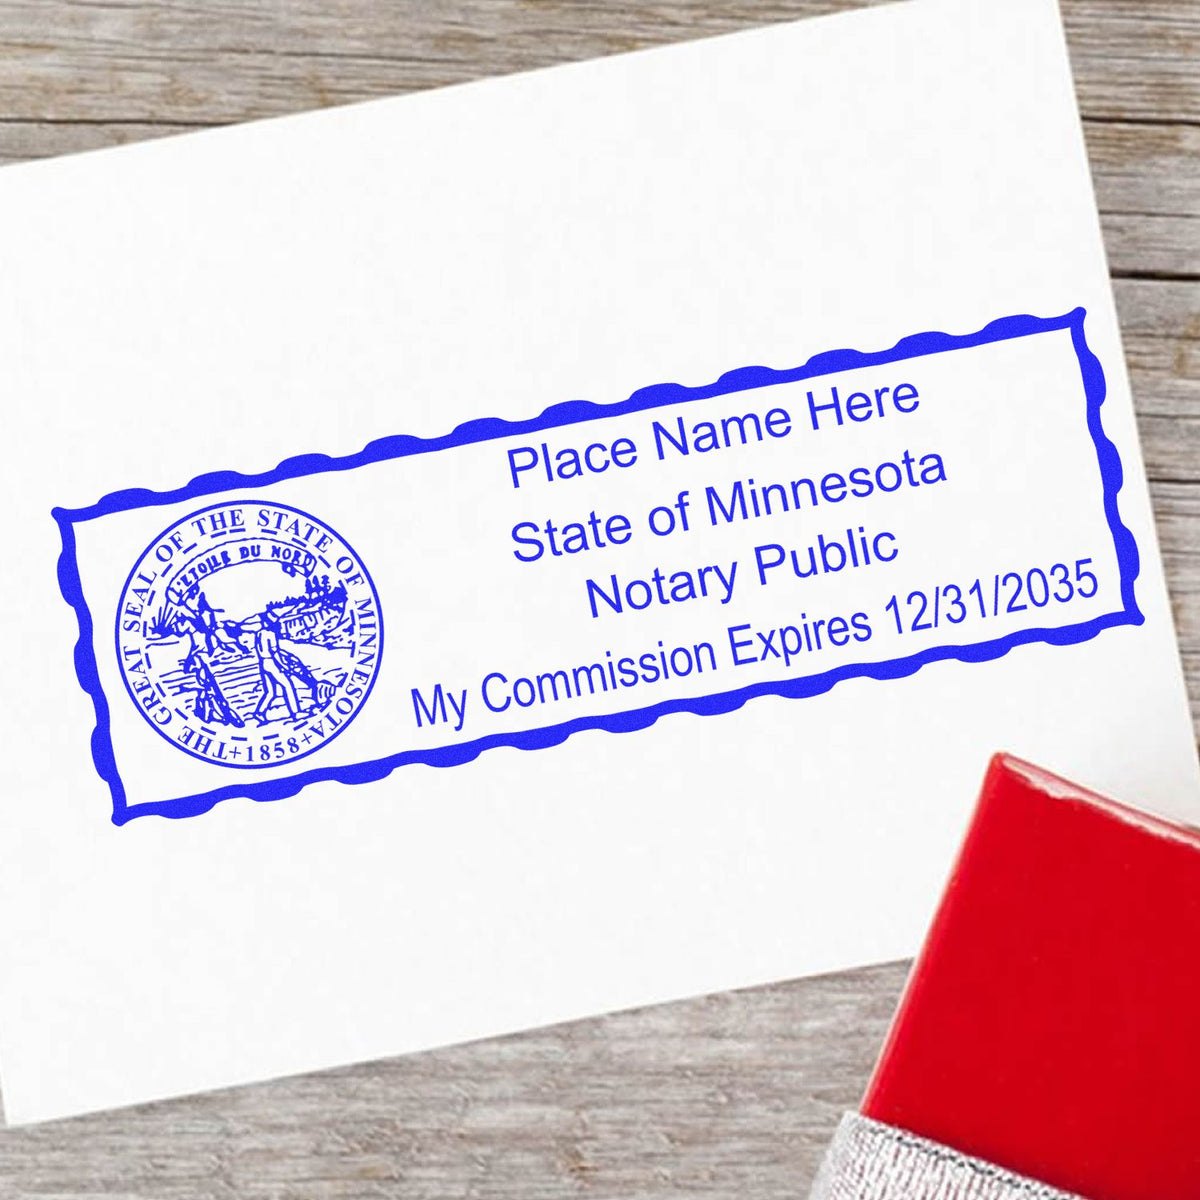 The PSI Minnesota Notary Stamp stamp impression comes to life with a crisp, detailed photo on paper - showcasing true professional quality.